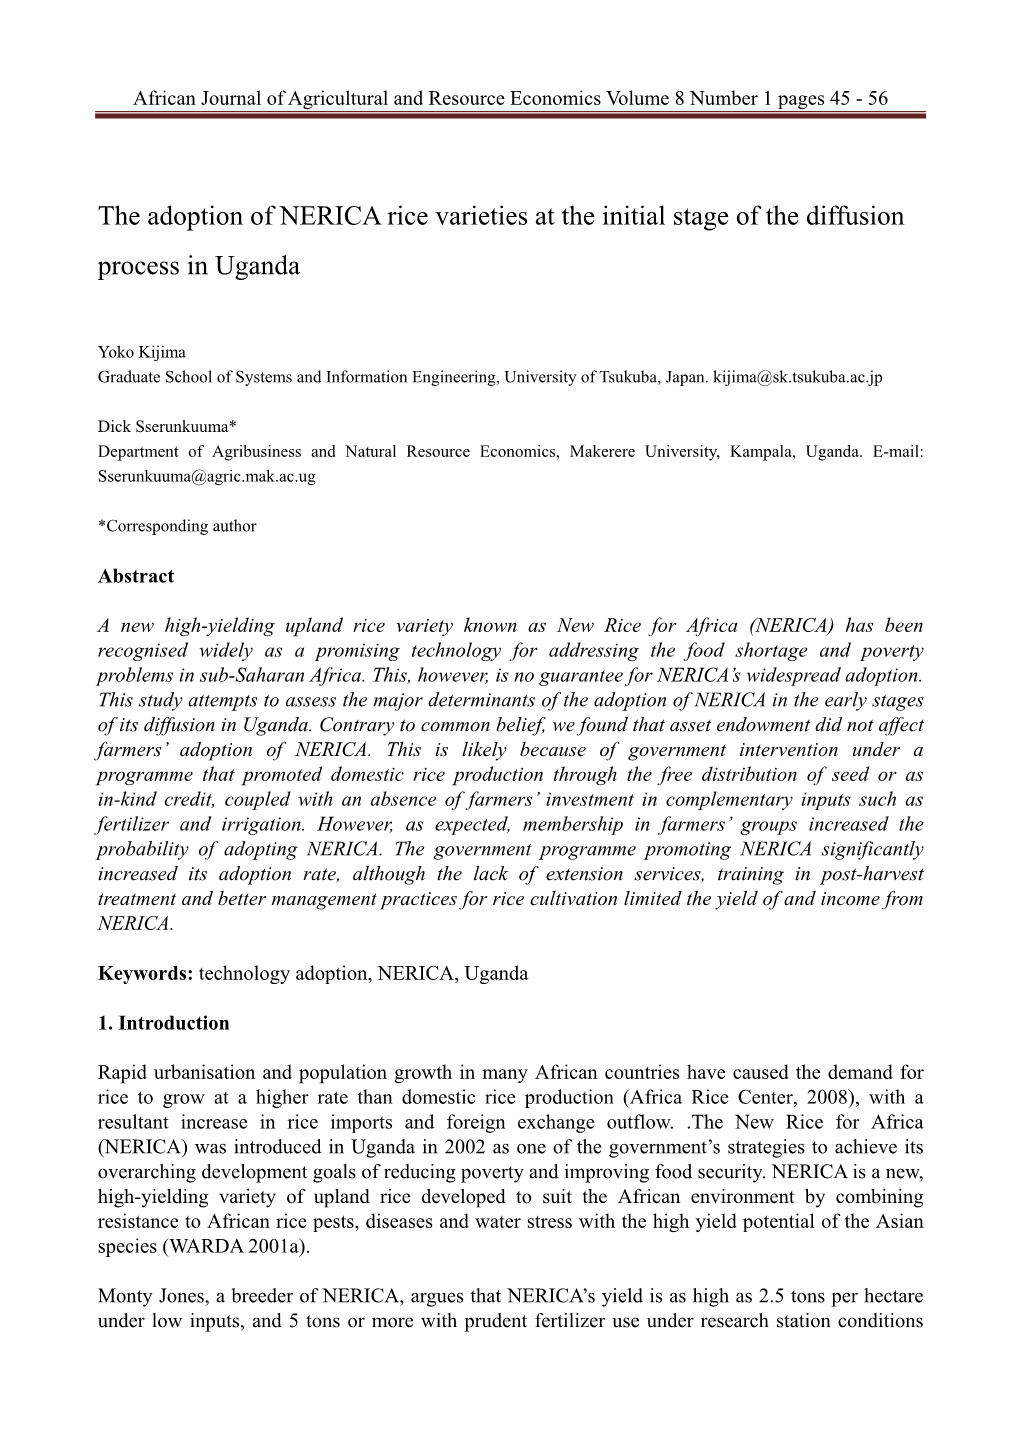 The Adoption of NERICA Rice Varieties at the Initial Stage of the Diffusion Process in Uganda